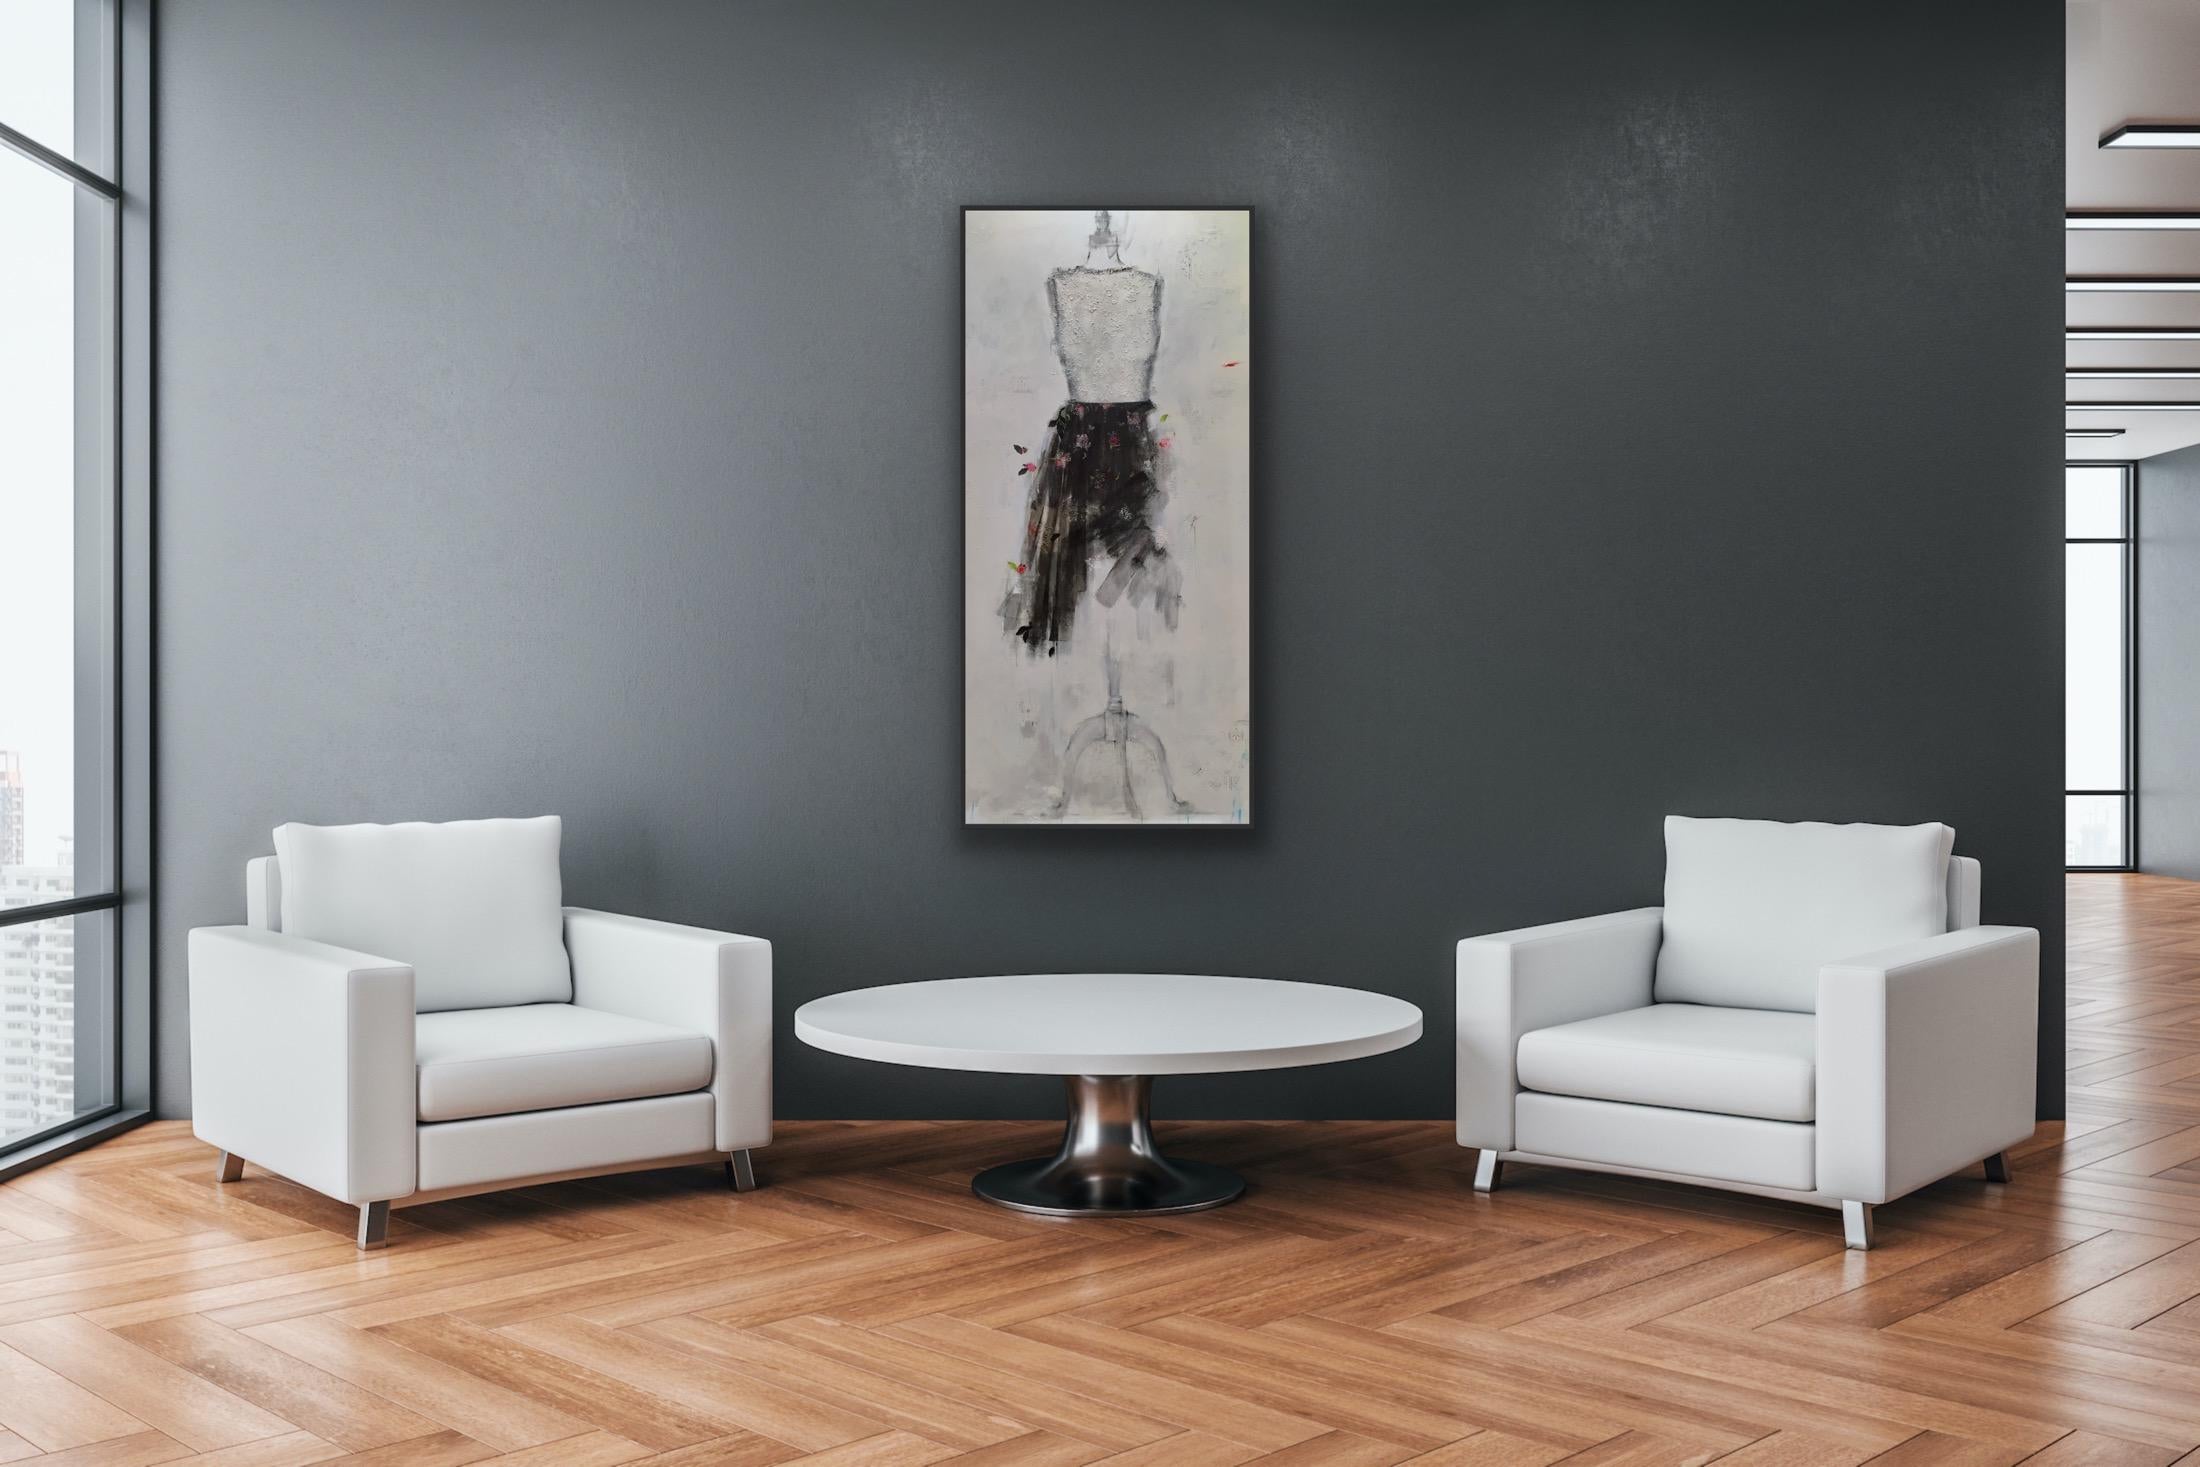 Chantilly Lace And A Pretty Place (Dress 26), 30x60, Black, White, Painting en vente 16